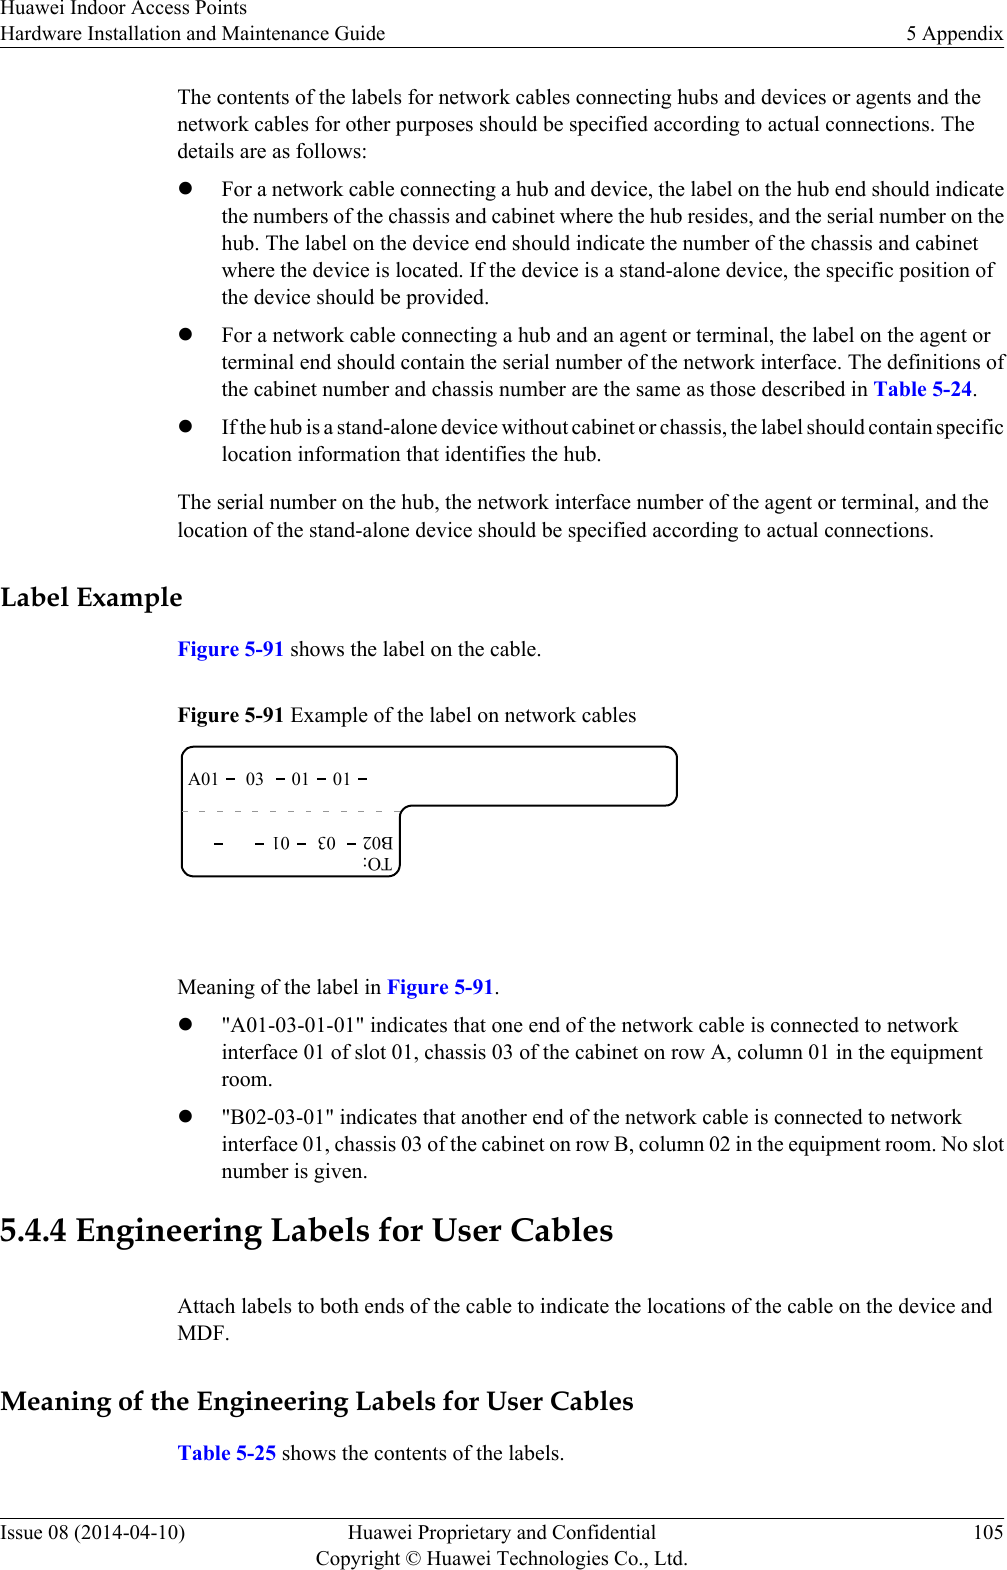 The contents of the labels for network cables connecting hubs and devices or agents and thenetwork cables for other purposes should be specified according to actual connections. Thedetails are as follows:lFor a network cable connecting a hub and device, the label on the hub end should indicatethe numbers of the chassis and cabinet where the hub resides, and the serial number on thehub. The label on the device end should indicate the number of the chassis and cabinetwhere the device is located. If the device is a stand-alone device, the specific position ofthe device should be provided.lFor a network cable connecting a hub and an agent or terminal, the label on the agent orterminal end should contain the serial number of the network interface. The definitions ofthe cabinet number and chassis number are the same as those described in Table 5-24.lIf the hub is a stand-alone device without cabinet or chassis, the label should contain specificlocation information that identifies the hub.The serial number on the hub, the network interface number of the agent or terminal, and thelocation of the stand-alone device should be specified according to actual connections.Label ExampleFigure 5-91 shows the label on the cable.Figure 5-91 Example of the label on network cablesA01TO:03 01 01B02 03 01 Meaning of the label in Figure 5-91.l&quot;A01-03-01-01&quot; indicates that one end of the network cable is connected to networkinterface 01 of slot 01, chassis 03 of the cabinet on row A, column 01 in the equipmentroom.l&quot;B02-03-01&quot; indicates that another end of the network cable is connected to networkinterface 01, chassis 03 of the cabinet on row B, column 02 in the equipment room. No slotnumber is given.5.4.4 Engineering Labels for User CablesAttach labels to both ends of the cable to indicate the locations of the cable on the device andMDF.Meaning of the Engineering Labels for User CablesTable 5-25 shows the contents of the labels.Huawei Indoor Access PointsHardware Installation and Maintenance Guide 5 AppendixIssue 08 (2014-04-10) Huawei Proprietary and ConfidentialCopyright © Huawei Technologies Co., Ltd.105